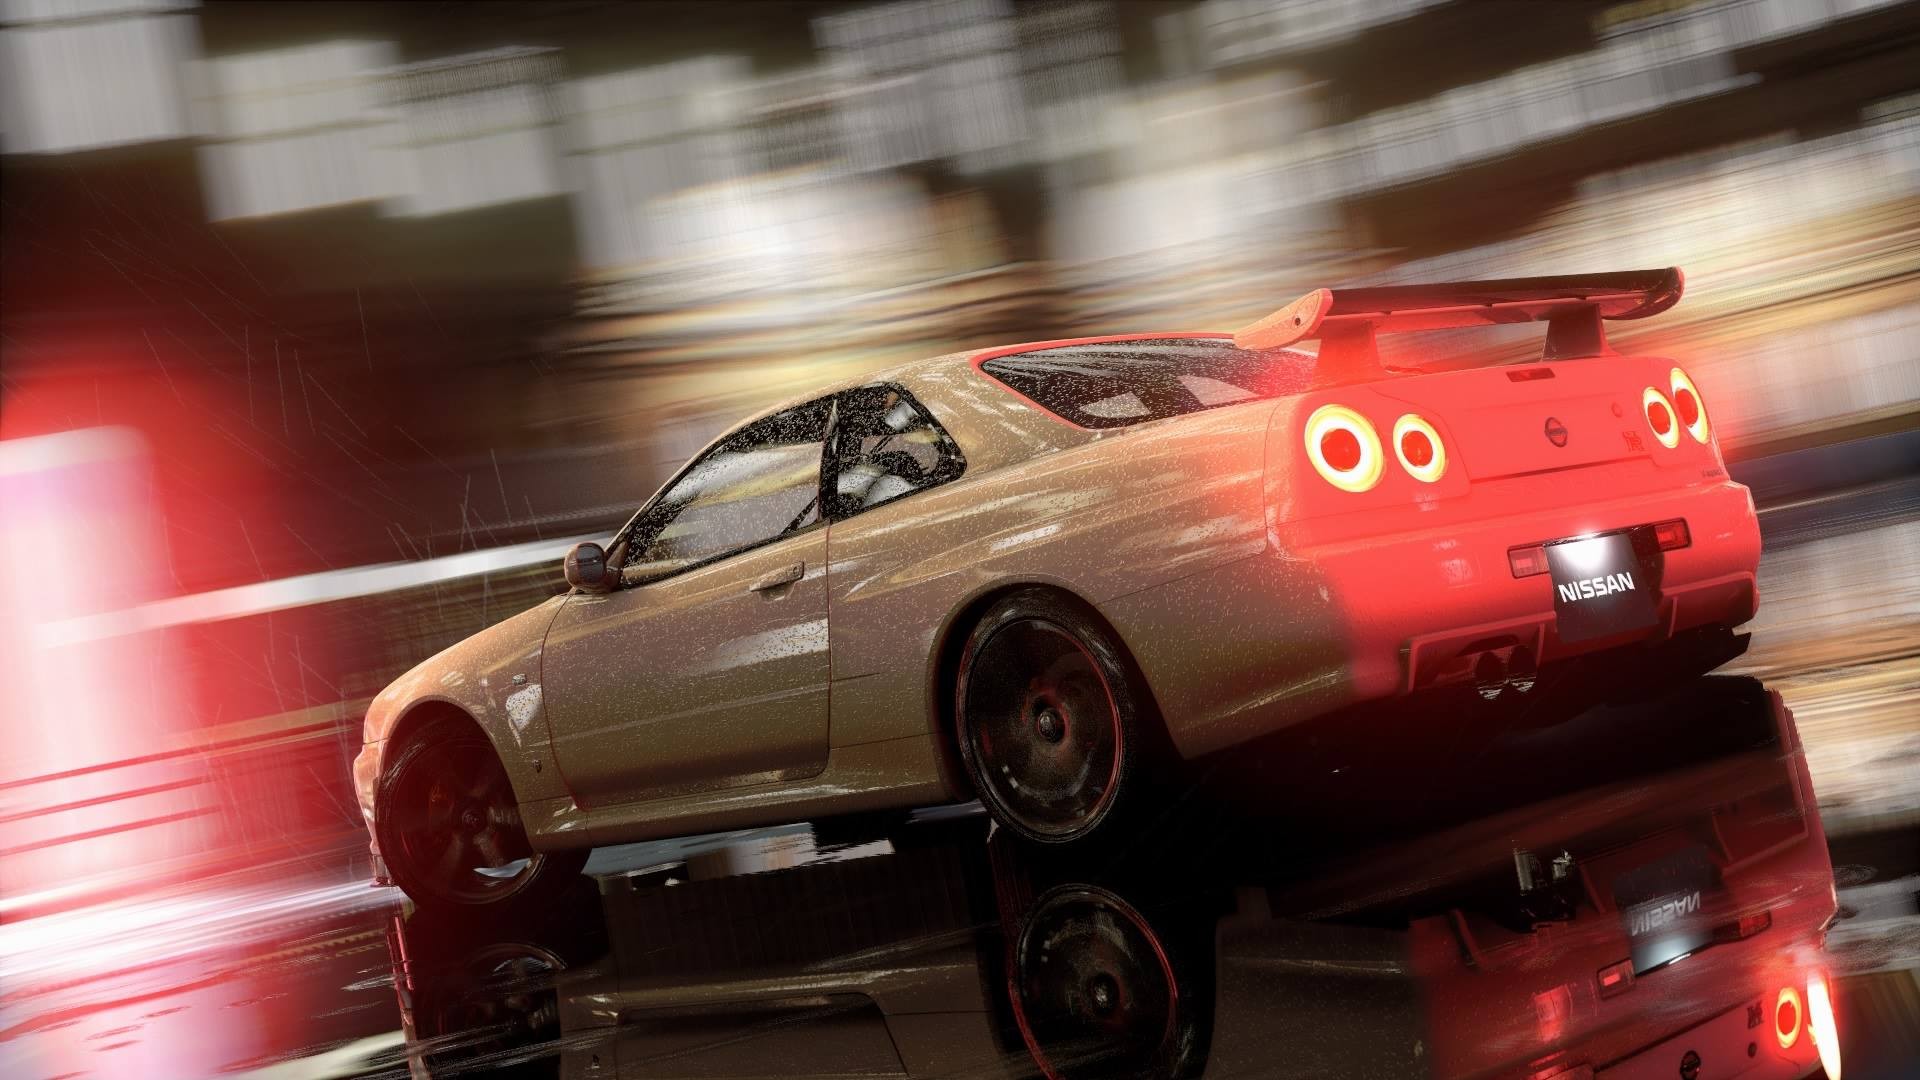 General 1920x1080 car Nissan video games Need for Speed Nissan Skyline Nissan Skyline R34 vehicle wet reflection